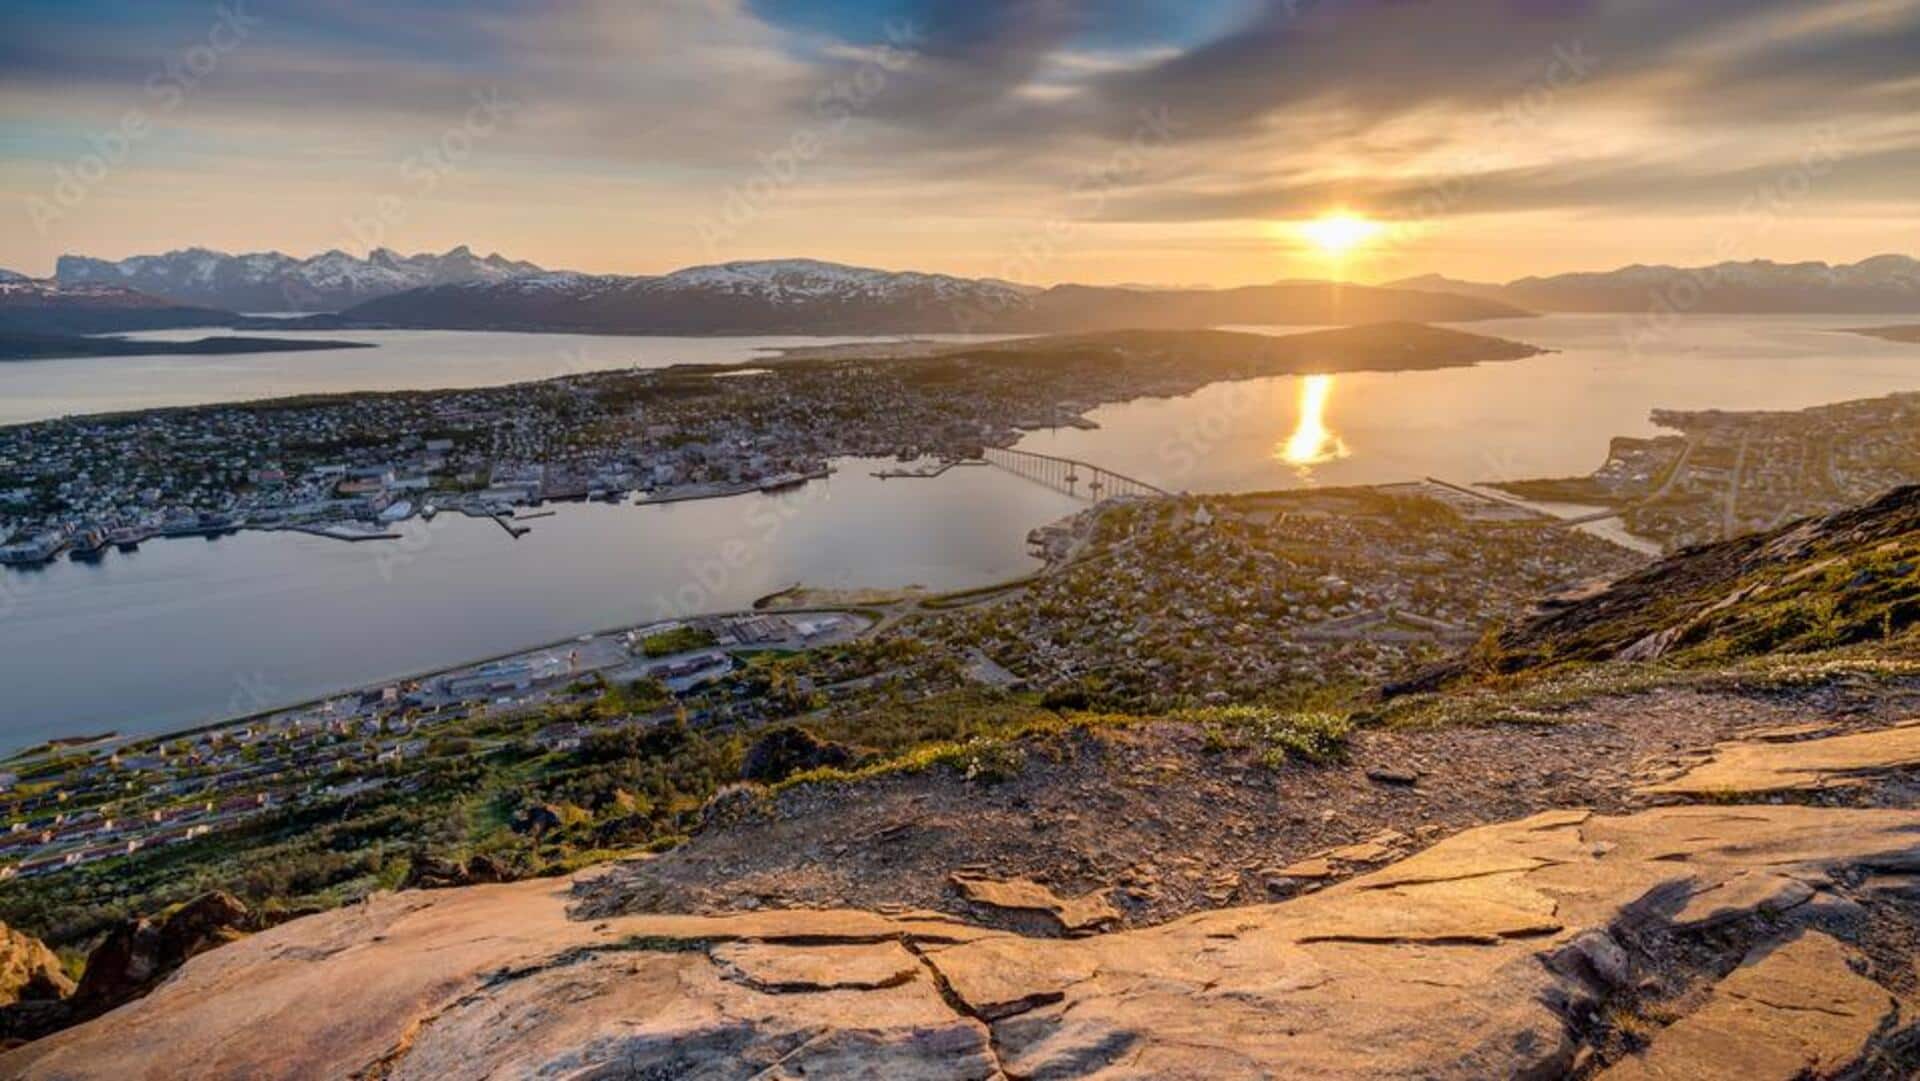 Midnight sun in Tromso is an attraction you can't miss